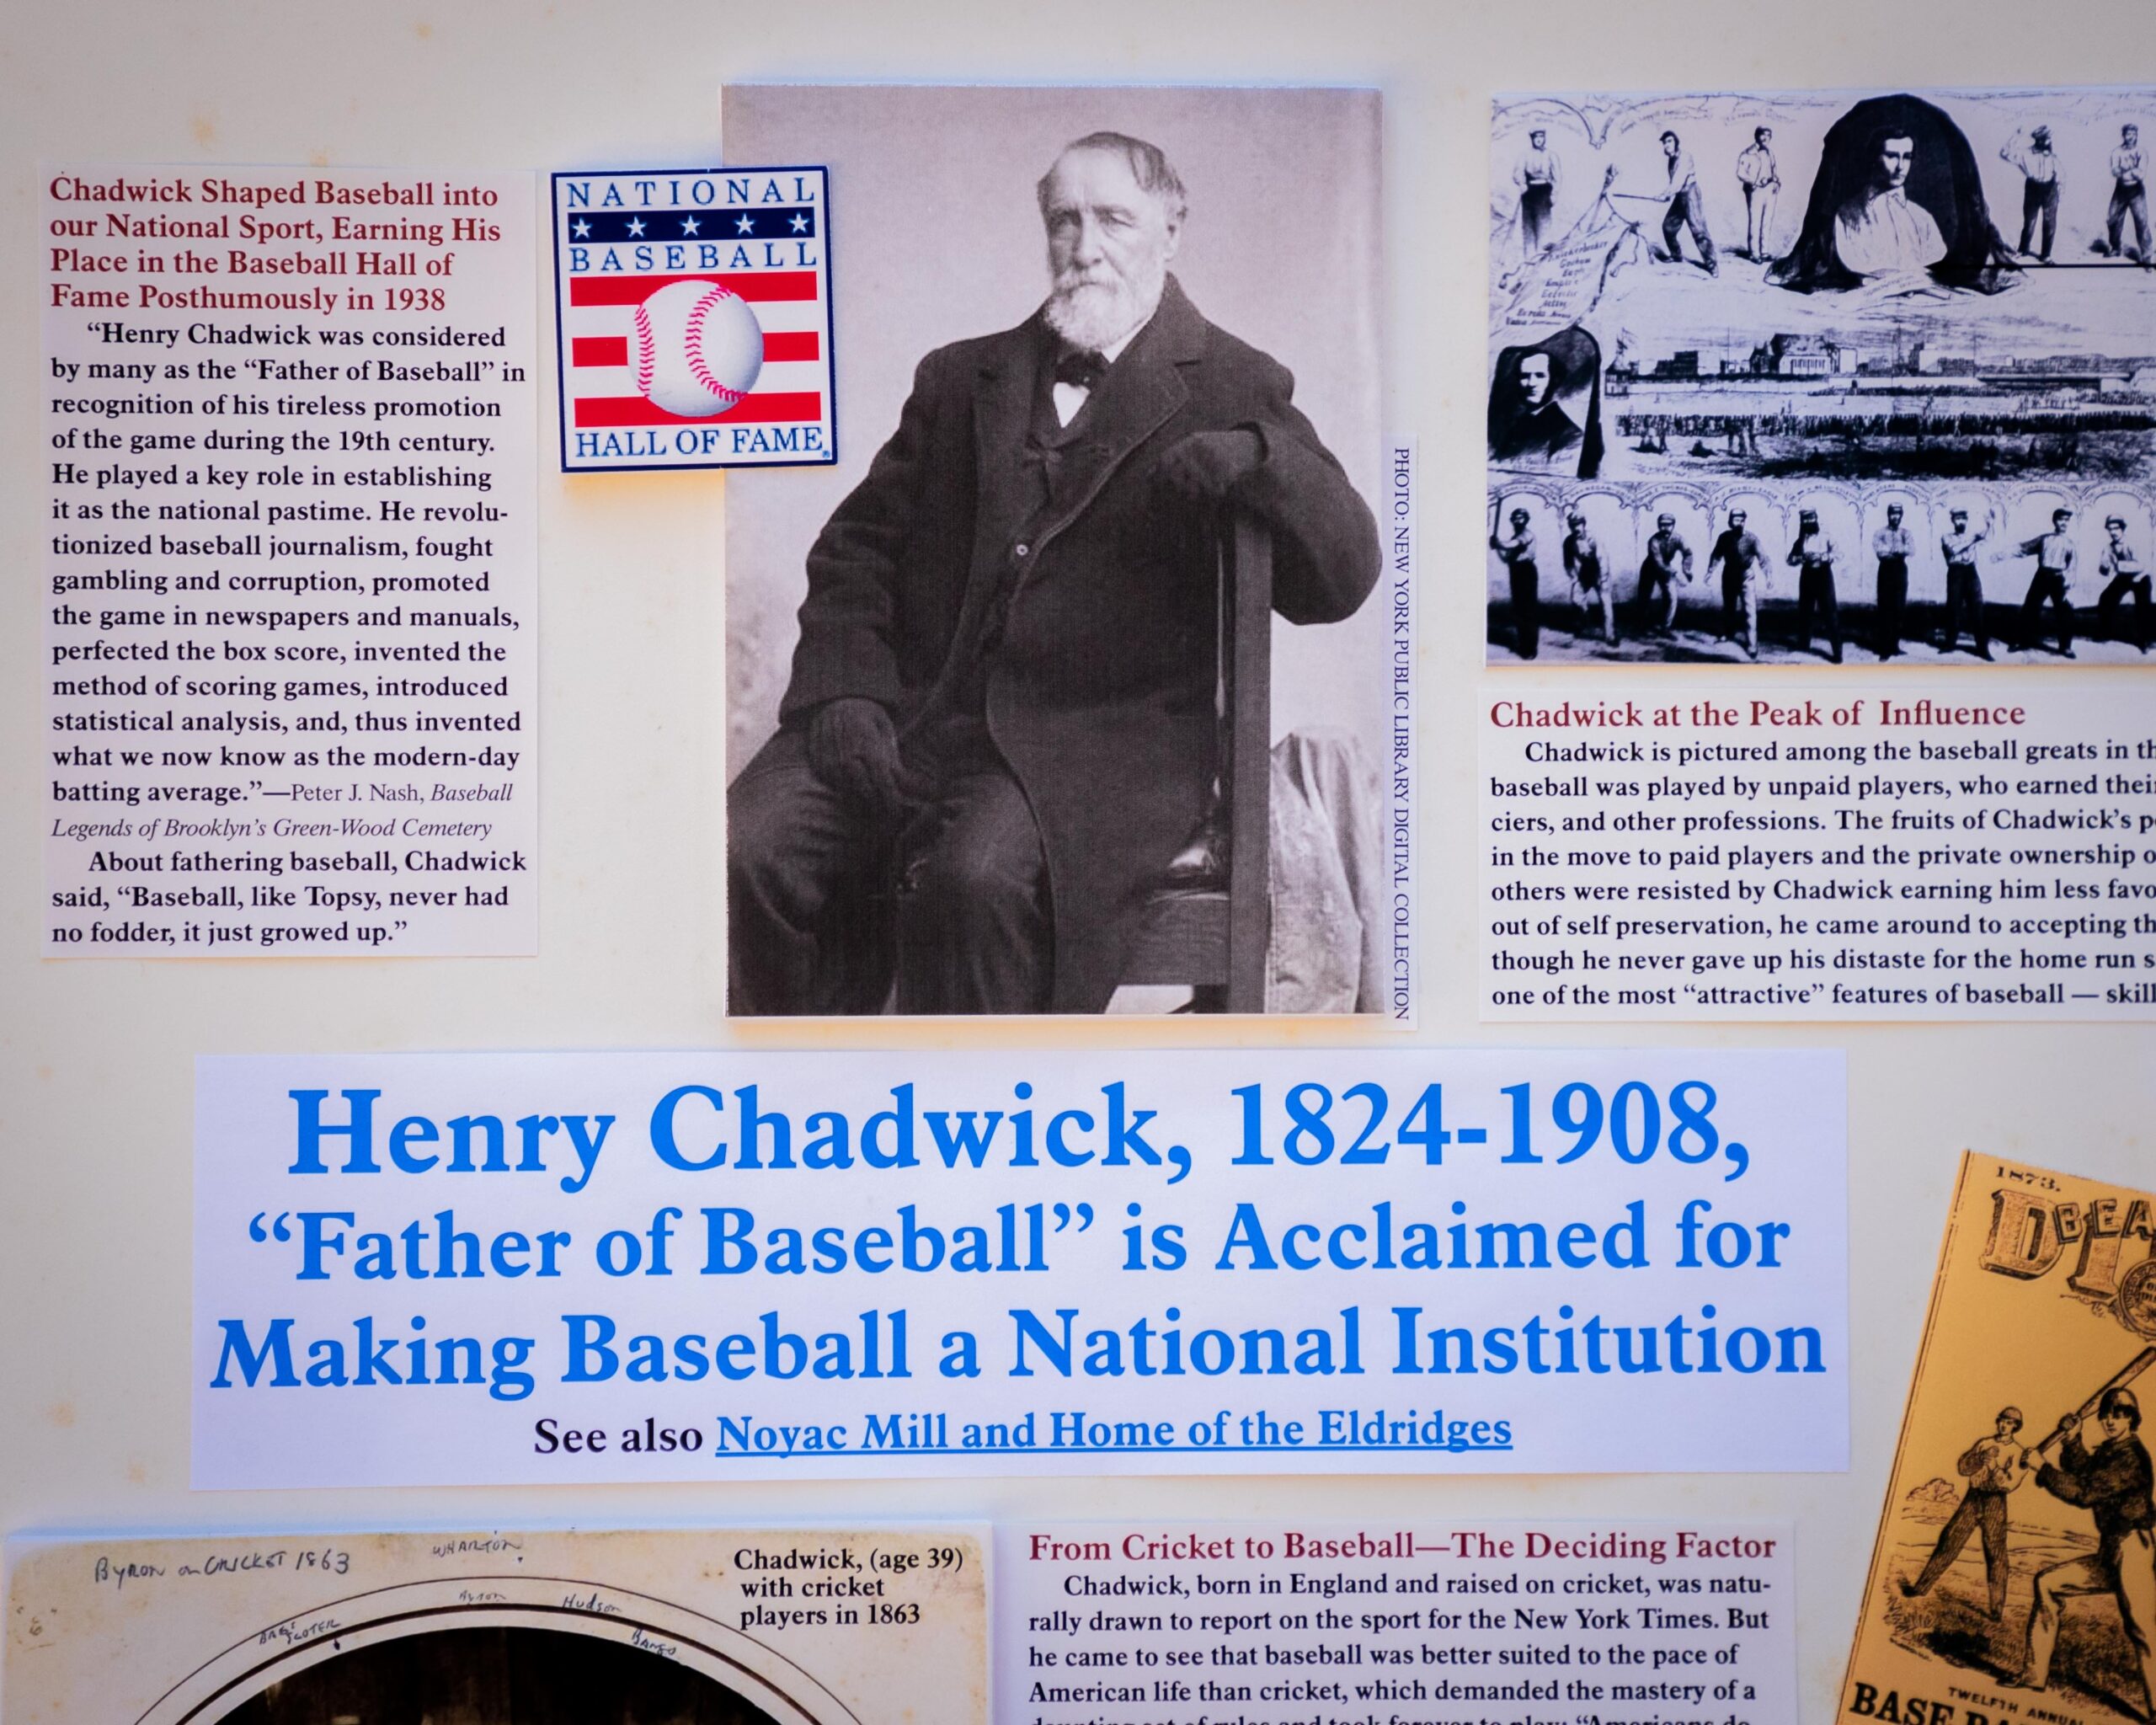 Henry Chadwick was inducted into the National Baseball Hall of Fame in 1938.     DEMETRIUS KAZANAS